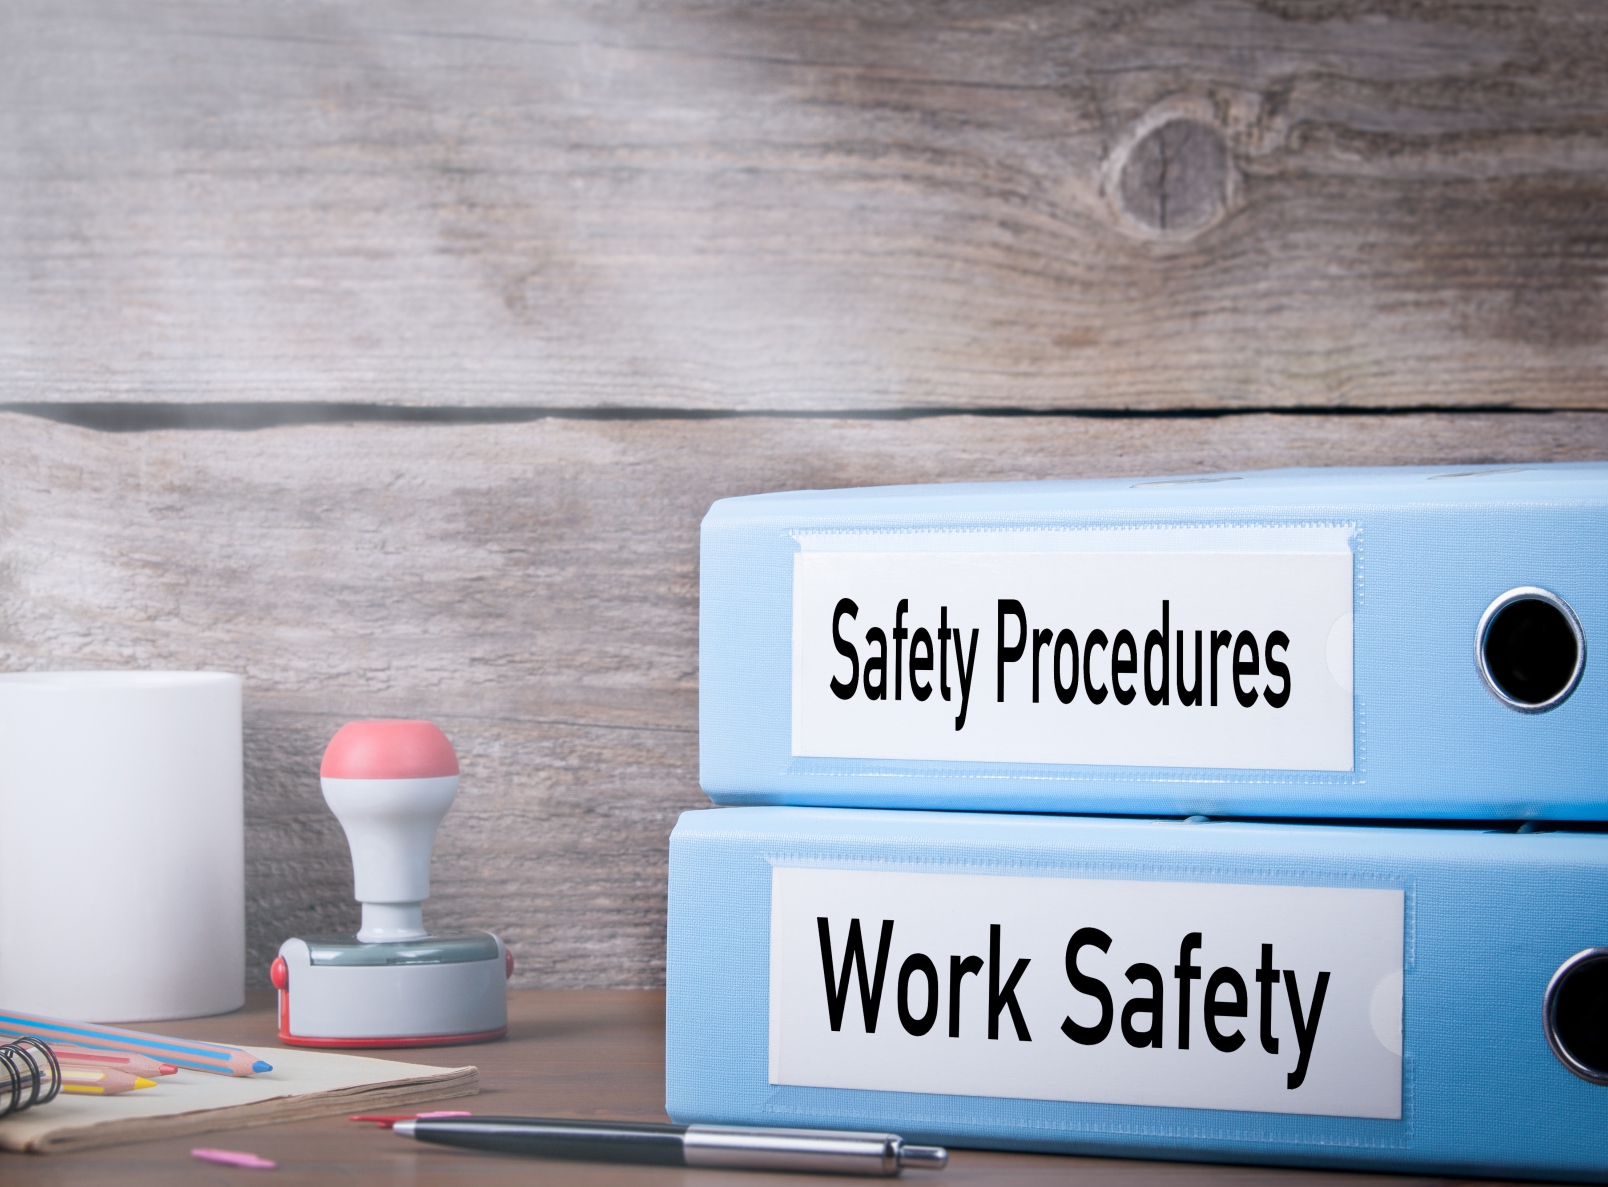 Health and Safety Practices: more than just good risk management